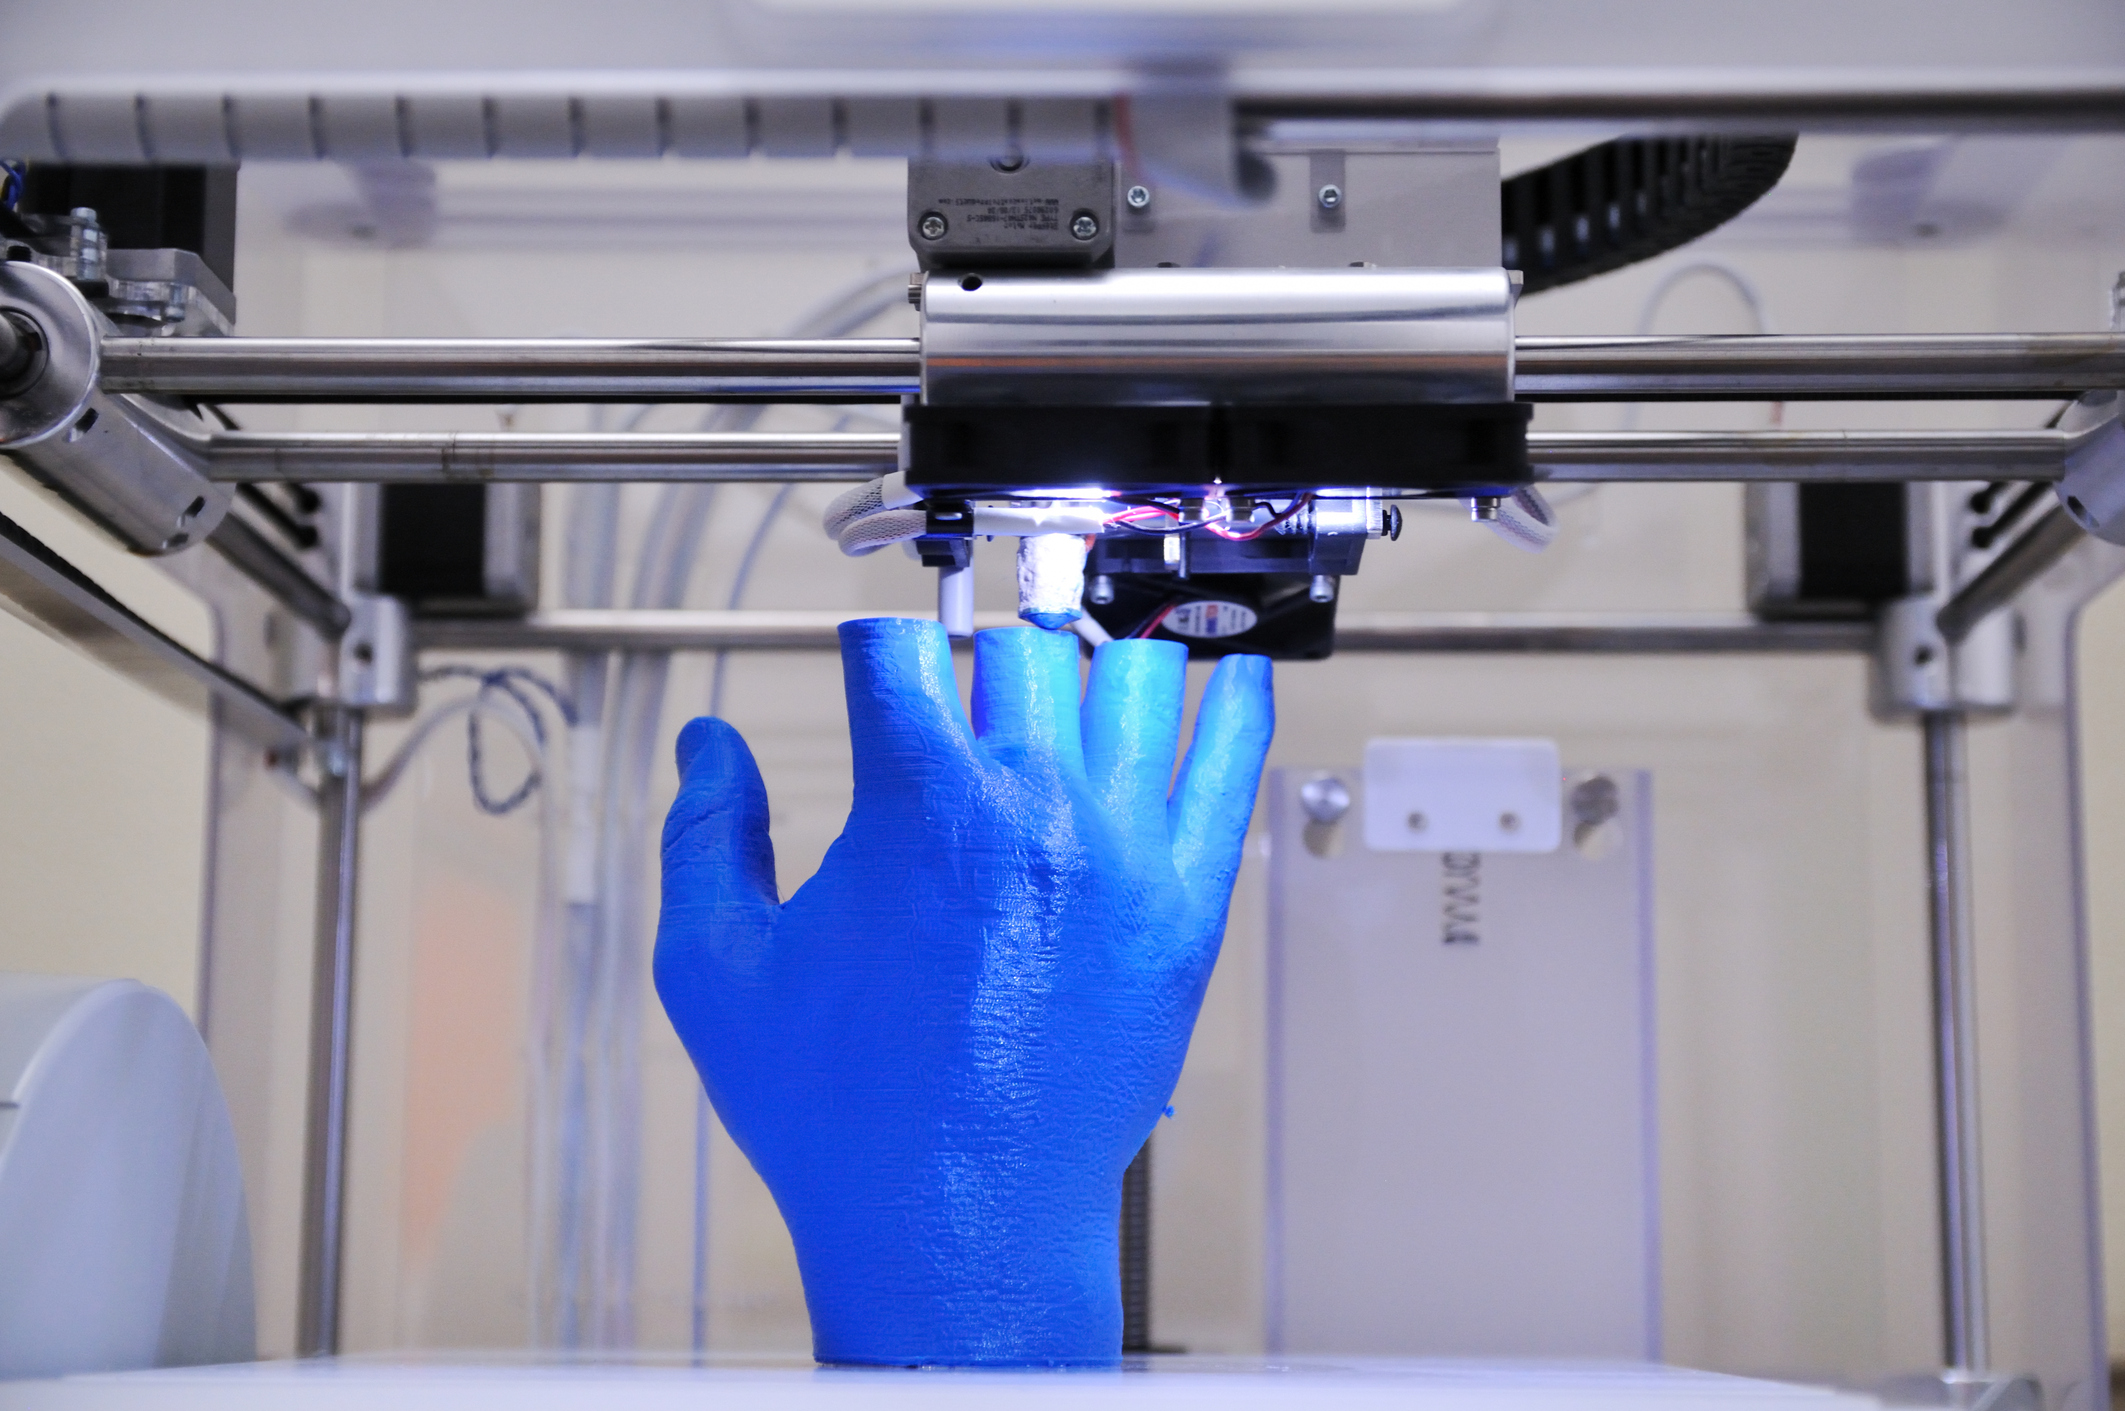 3D printer output in the form of a hand